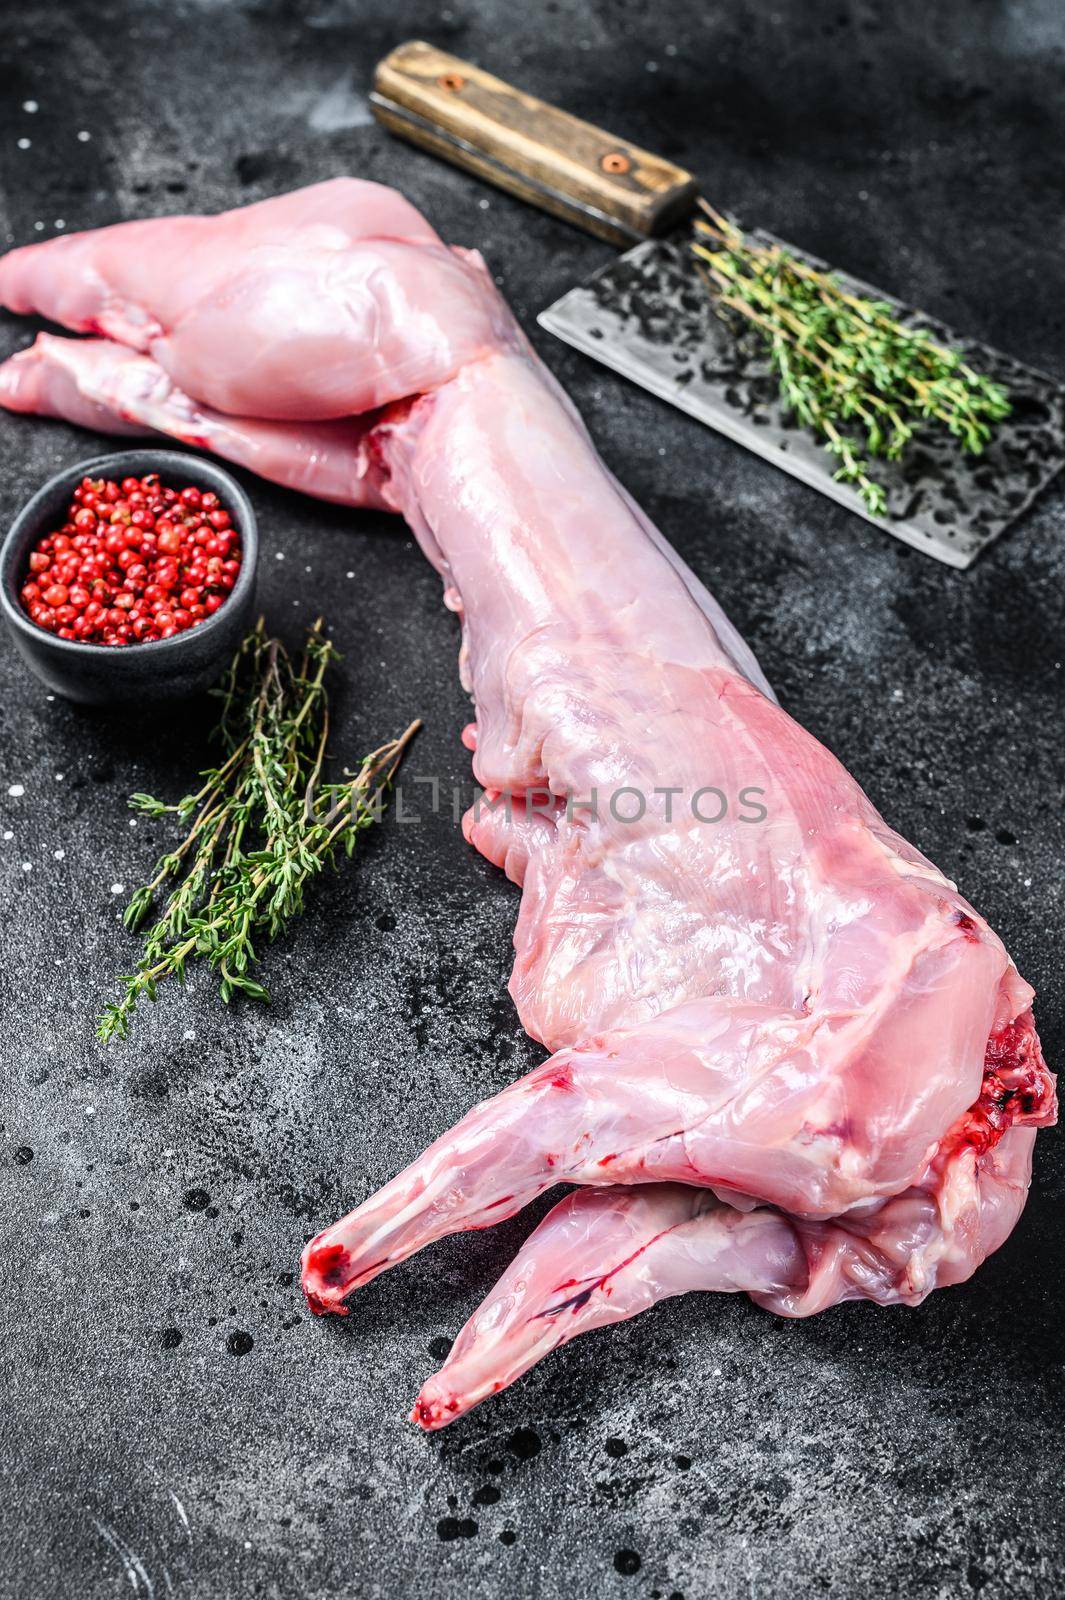 Whole raw rabbit with cooking spices. Black background. Top view.